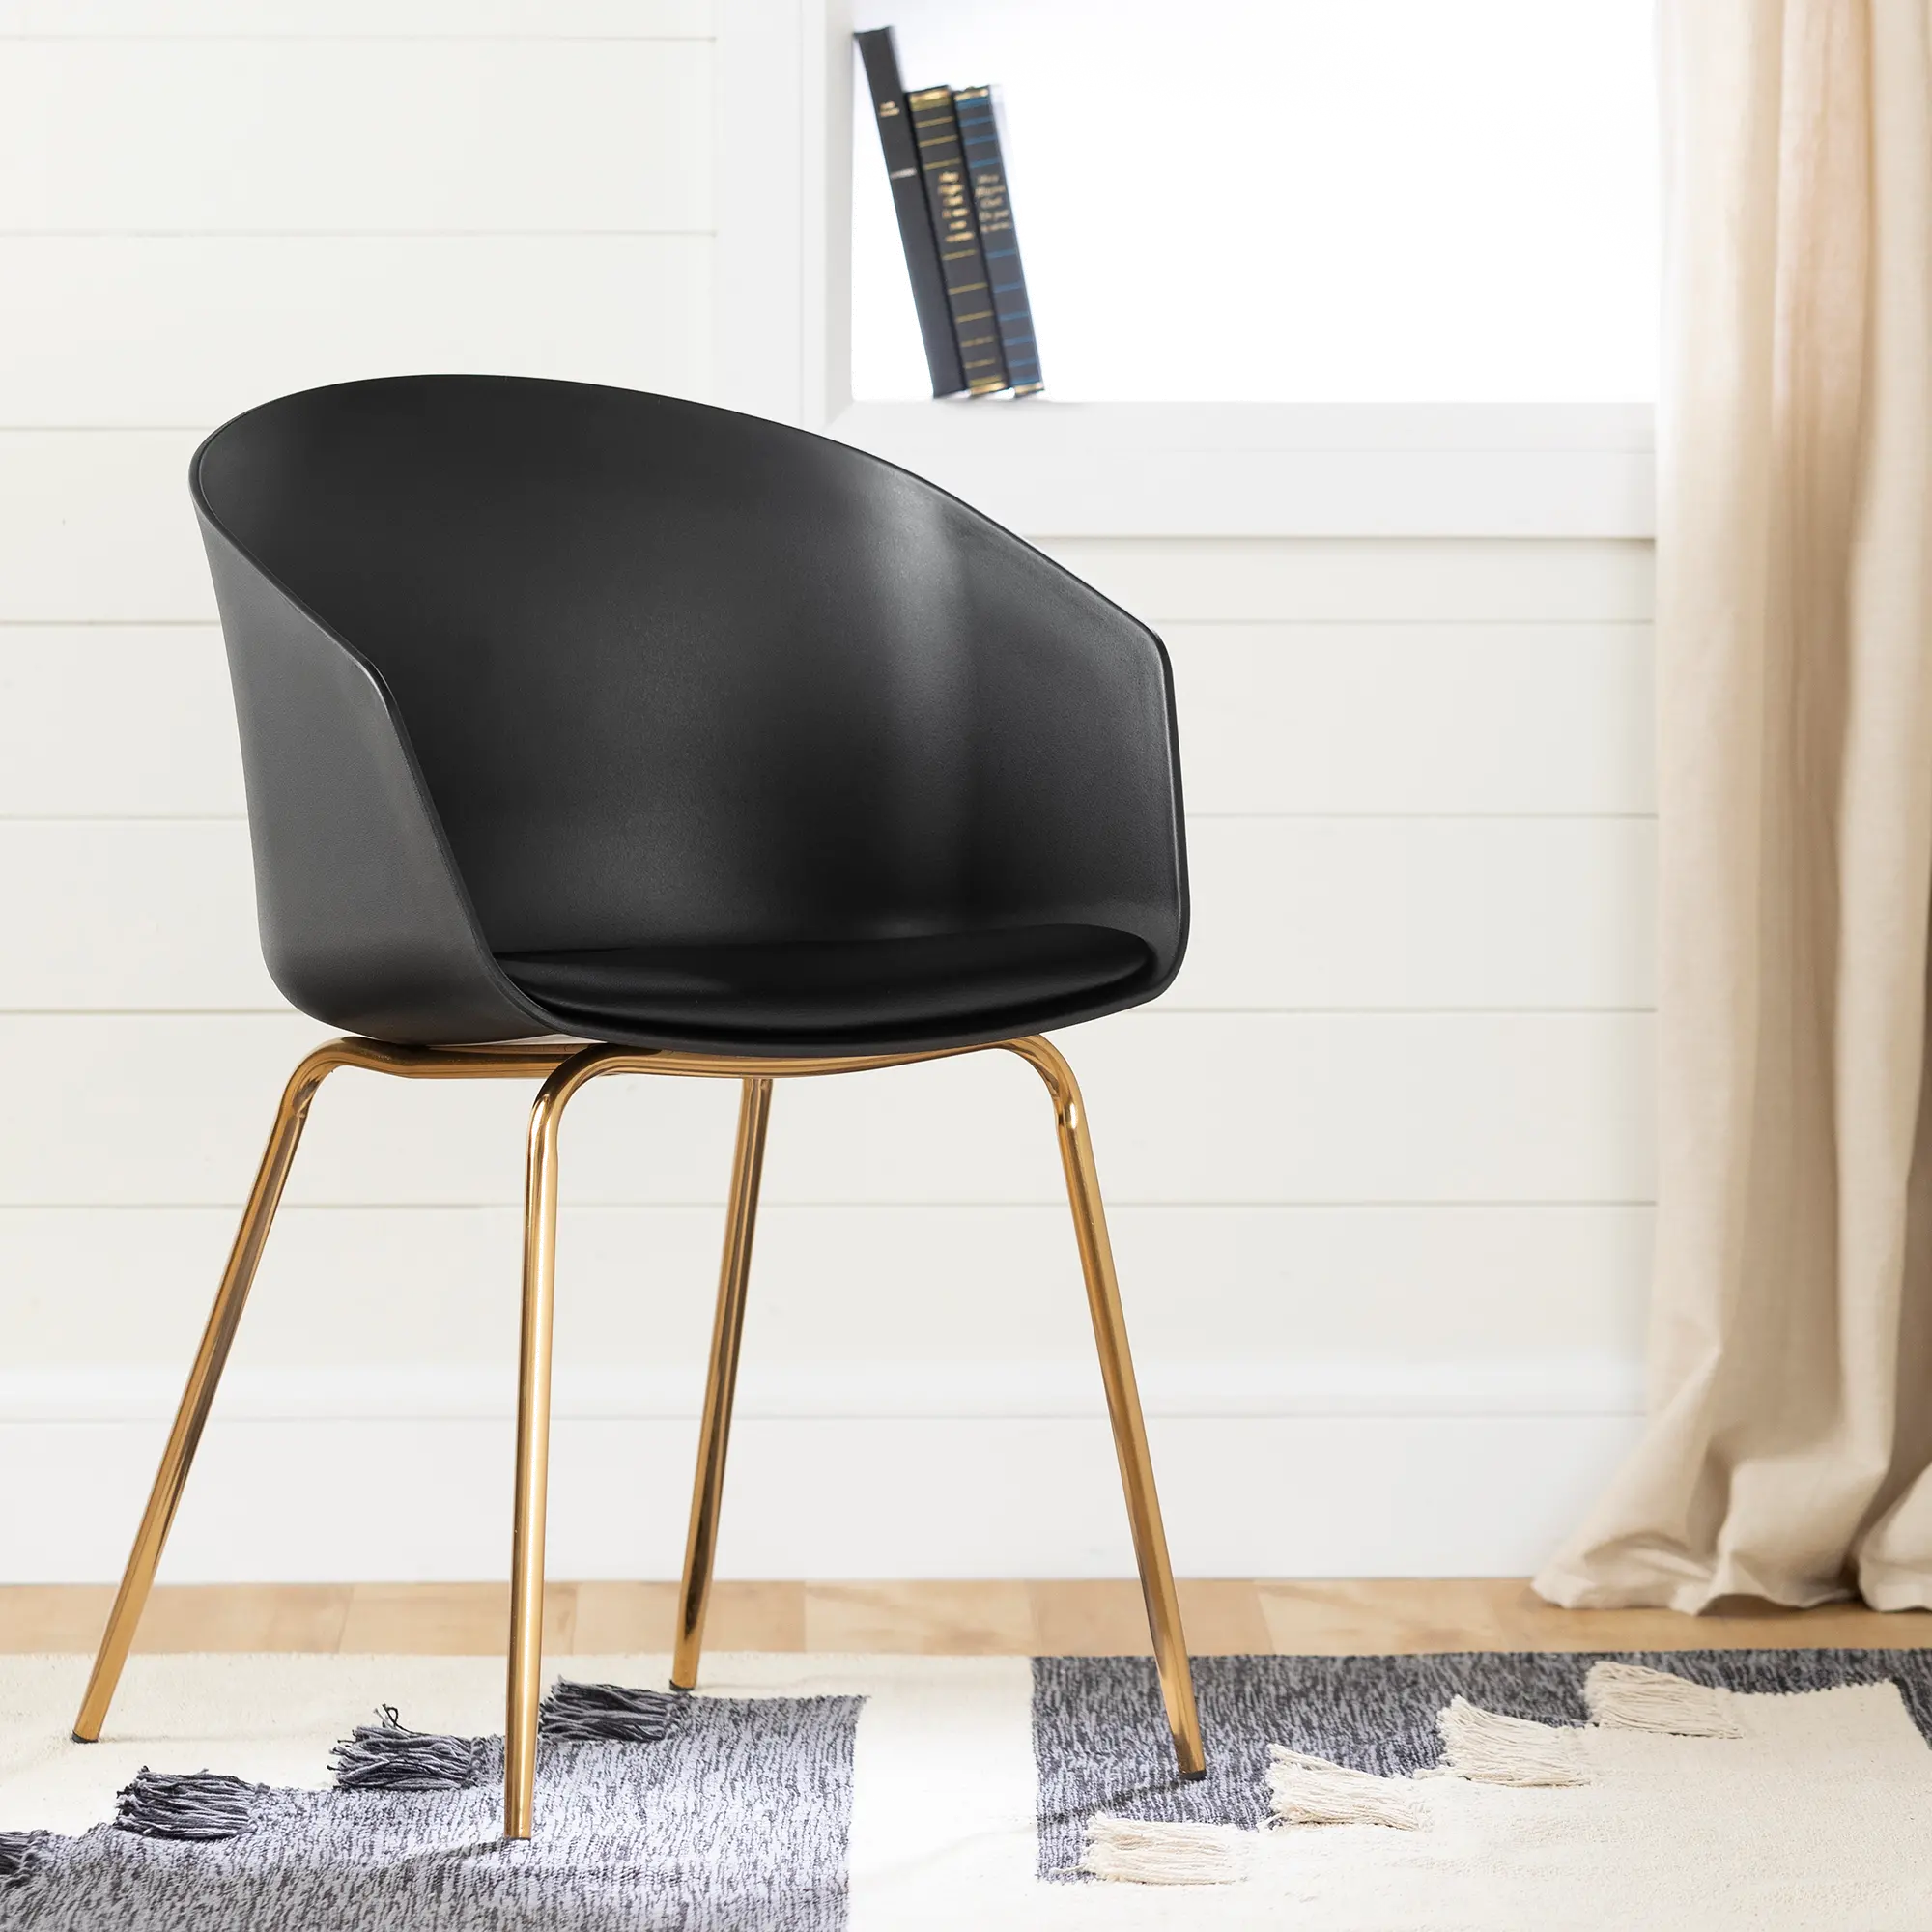 Black Chair with Gold Metal Legs - Flam